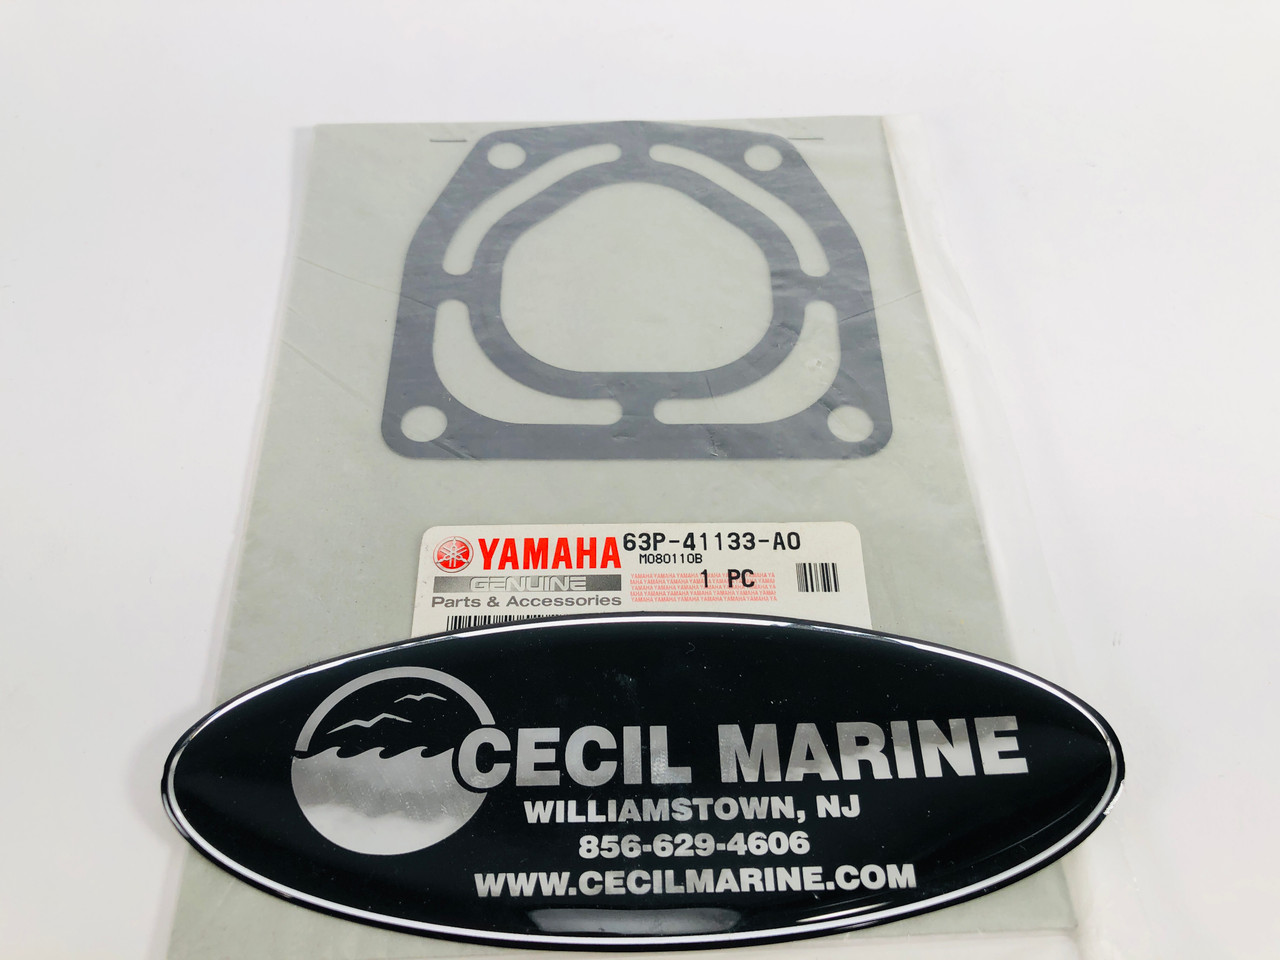 $10.99* GENUINE YAMAHA no tax* GASKET, EXHAUST MANI 63P-41133-A0-00 *In Stock & Ready To Ship